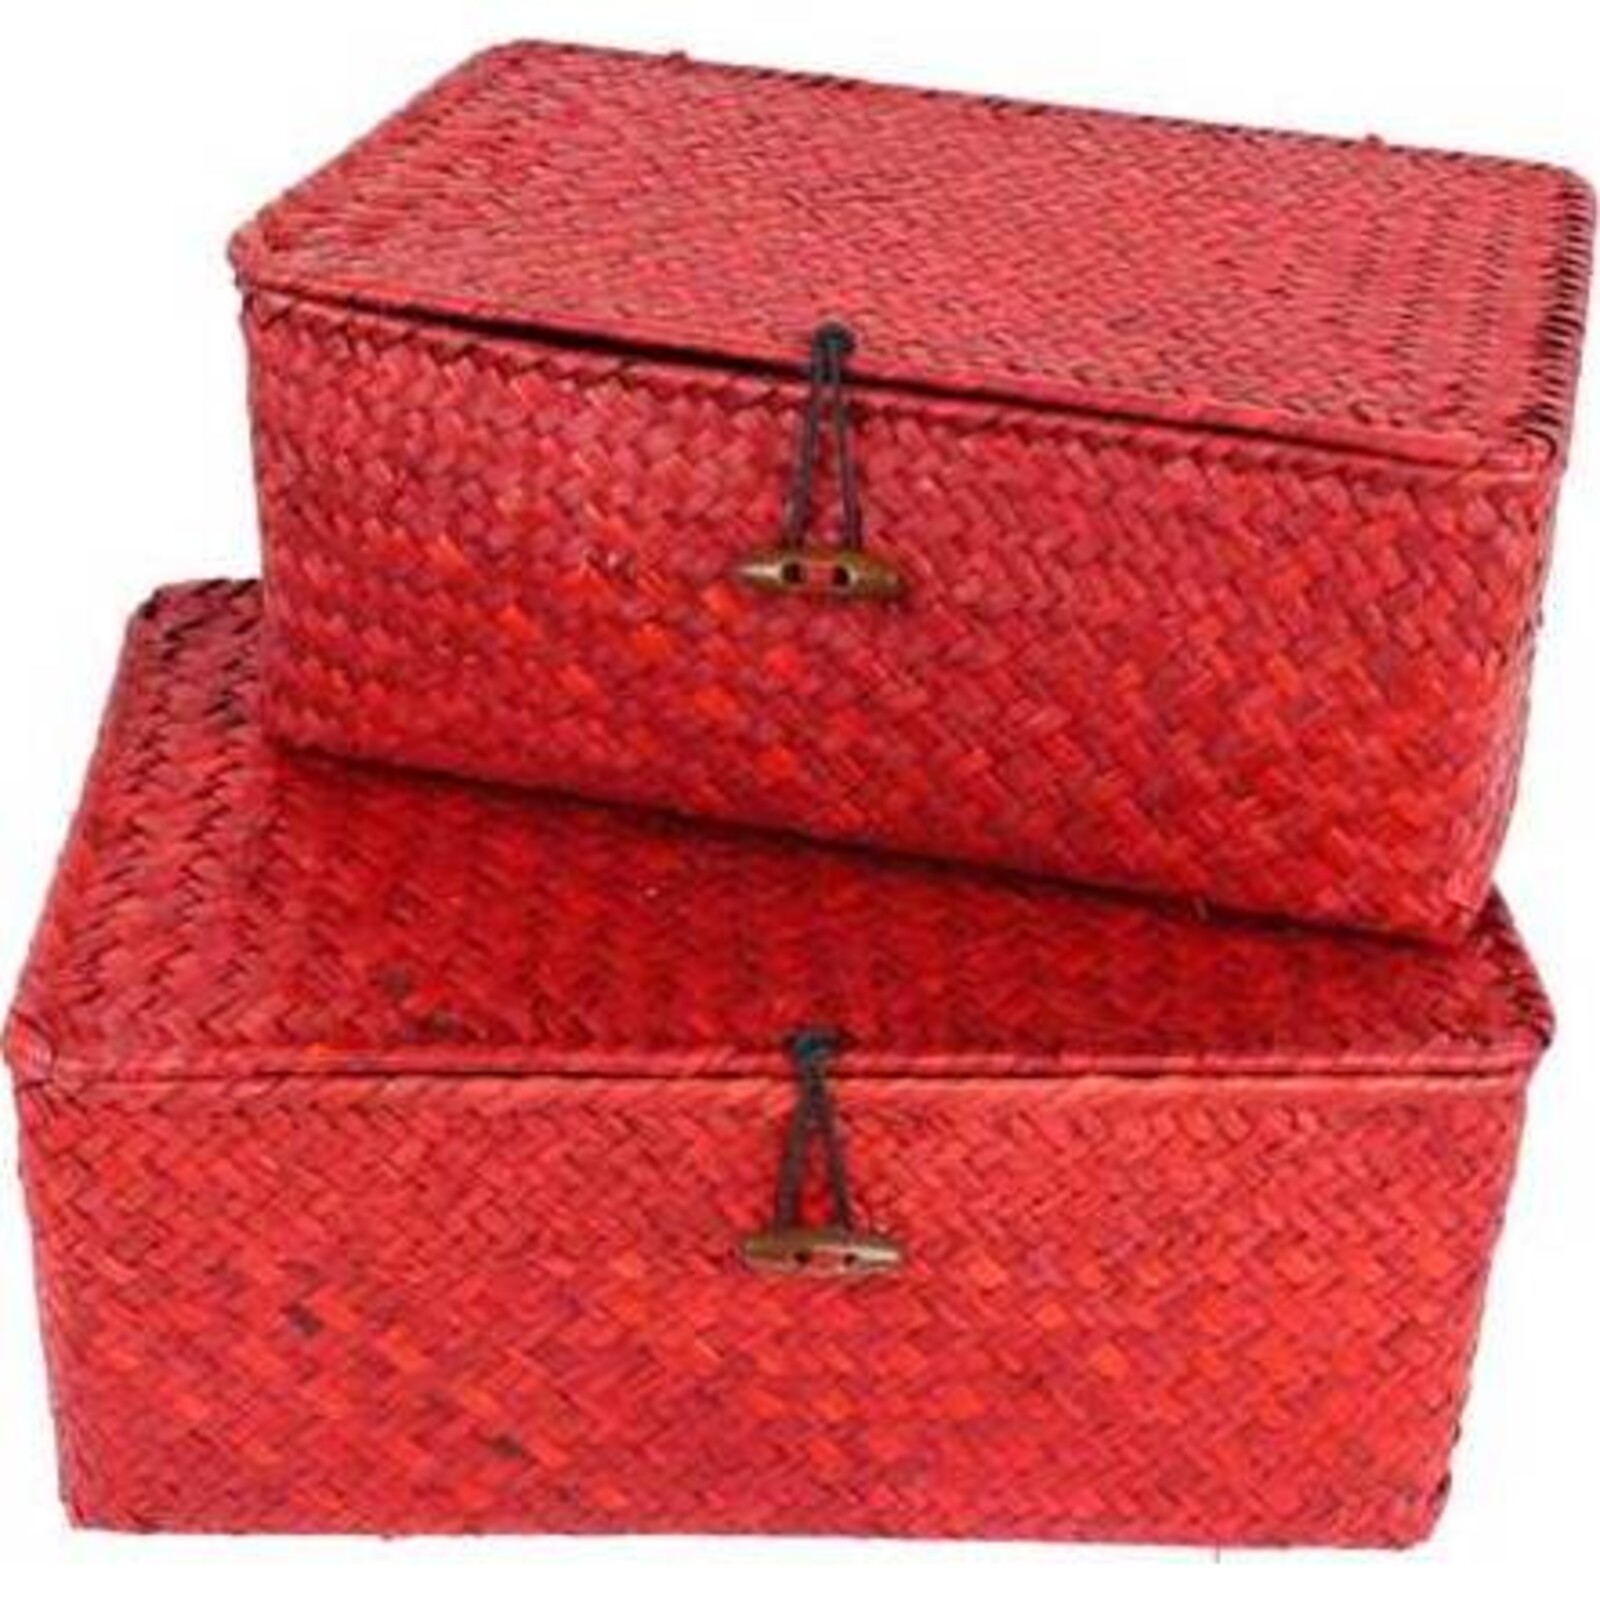 Woven Box Lrg Red S/2